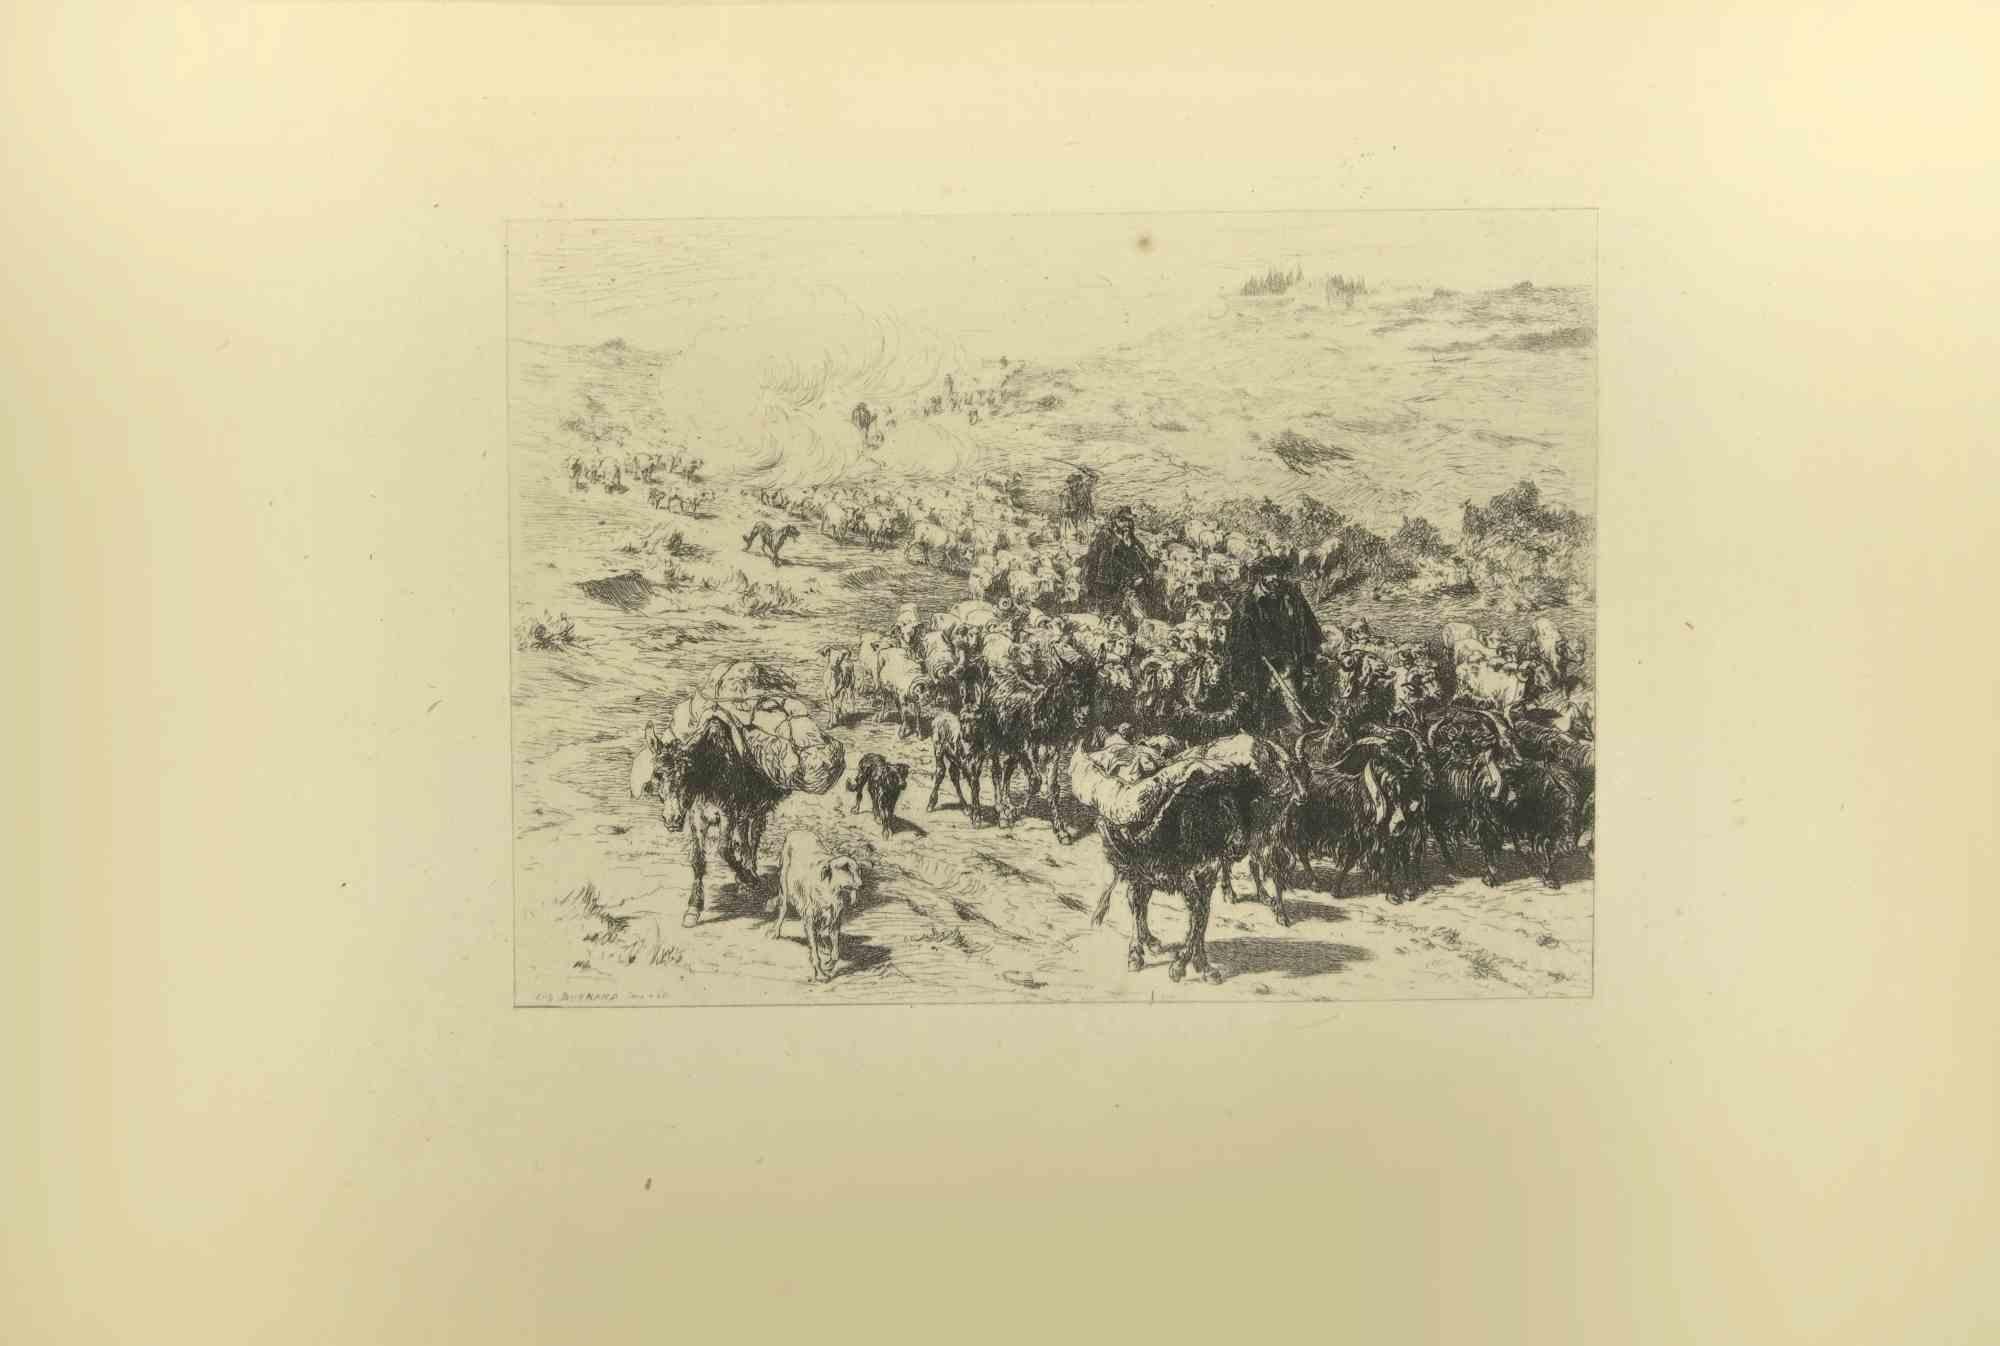 The Descent of the Herds is an etching realized by Eugène Burnand (1850-1921) in the Late 19th century.
Good conditions with foxing.
The artwork is realized through short and deft strokes, an admirable scene created by realistic mastery through